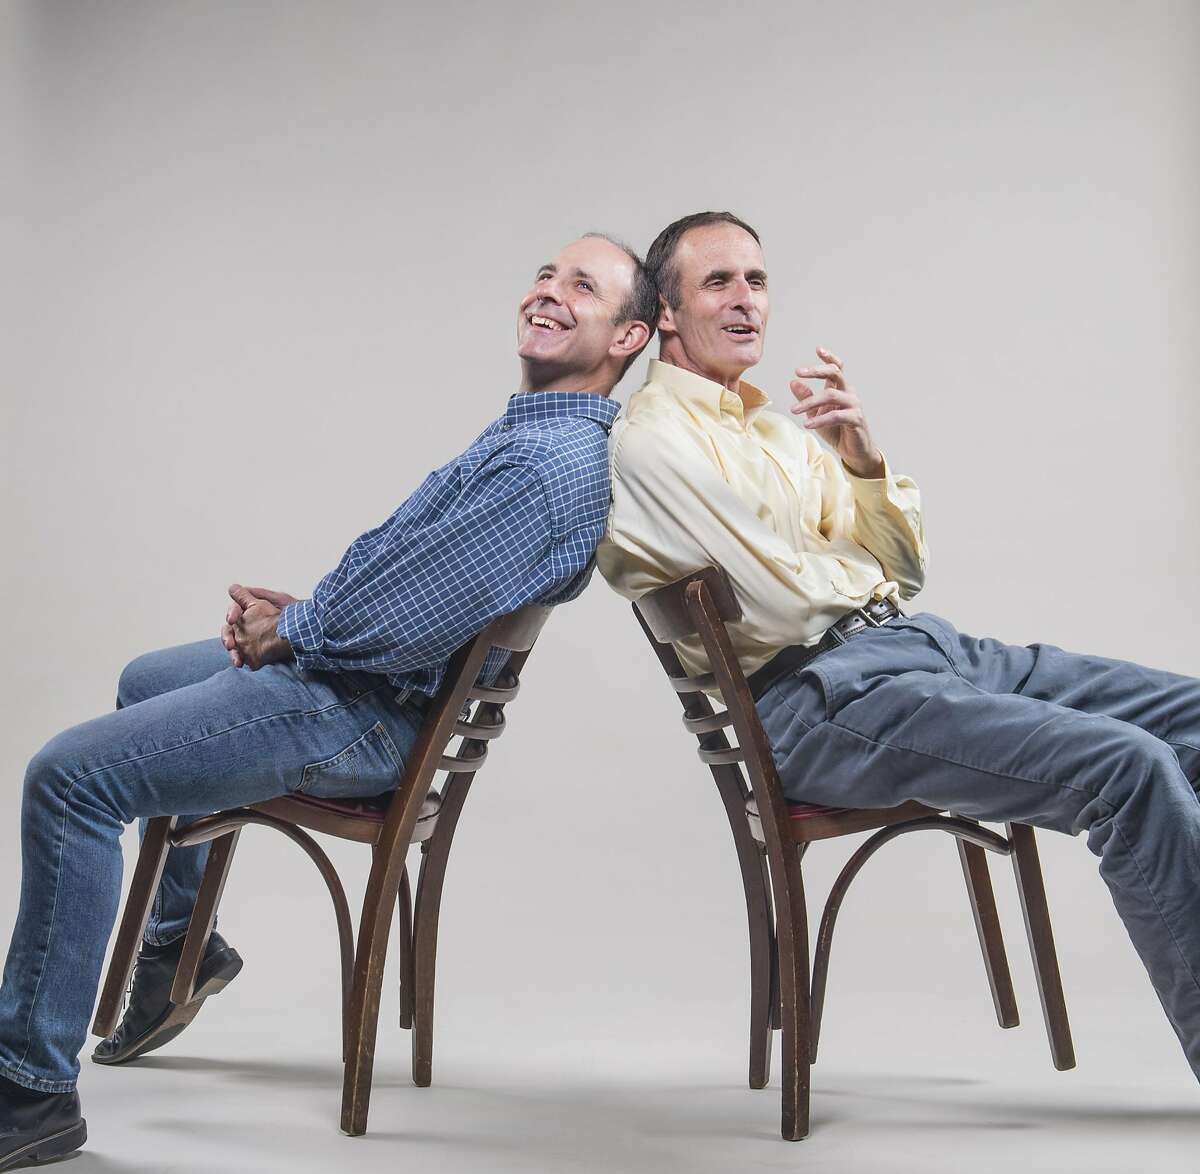 "Two Minds" at the Marsh investigates the unique collaboration and troubled friendship between brilliant Israeli psychologists Amos Tversky (Brian Herndon, left) and Daniel Kahneman (Jackson Davis, right).